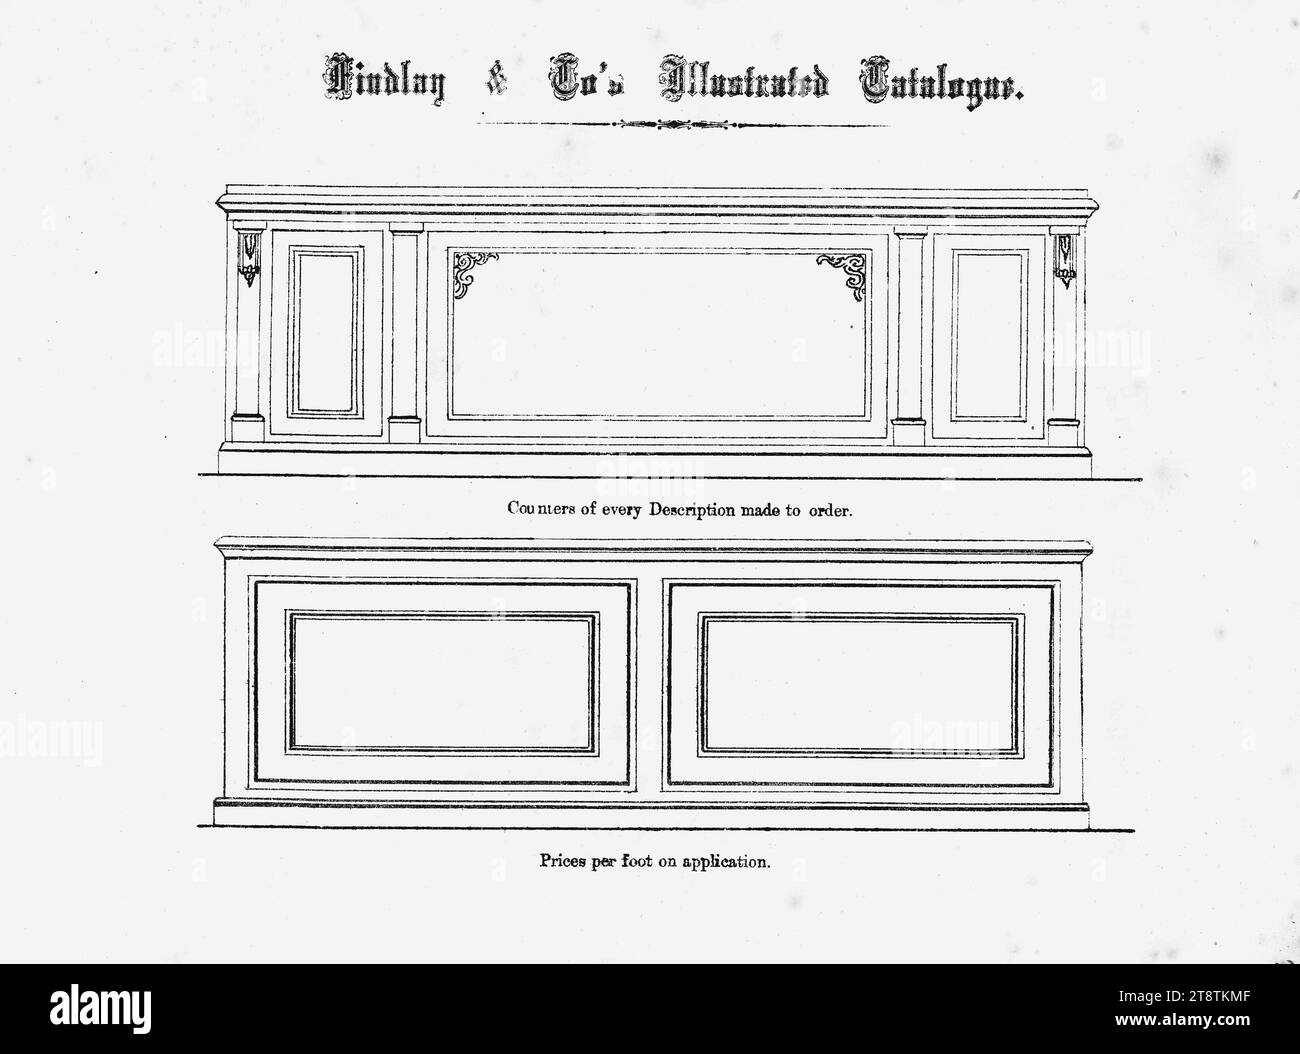 Findlay & Co.: Findlay and Co's illustrated catalogue. Counters of every description made to order. Prices per foot on application. 1874, Shows elevations of designs for counters Stock Photo